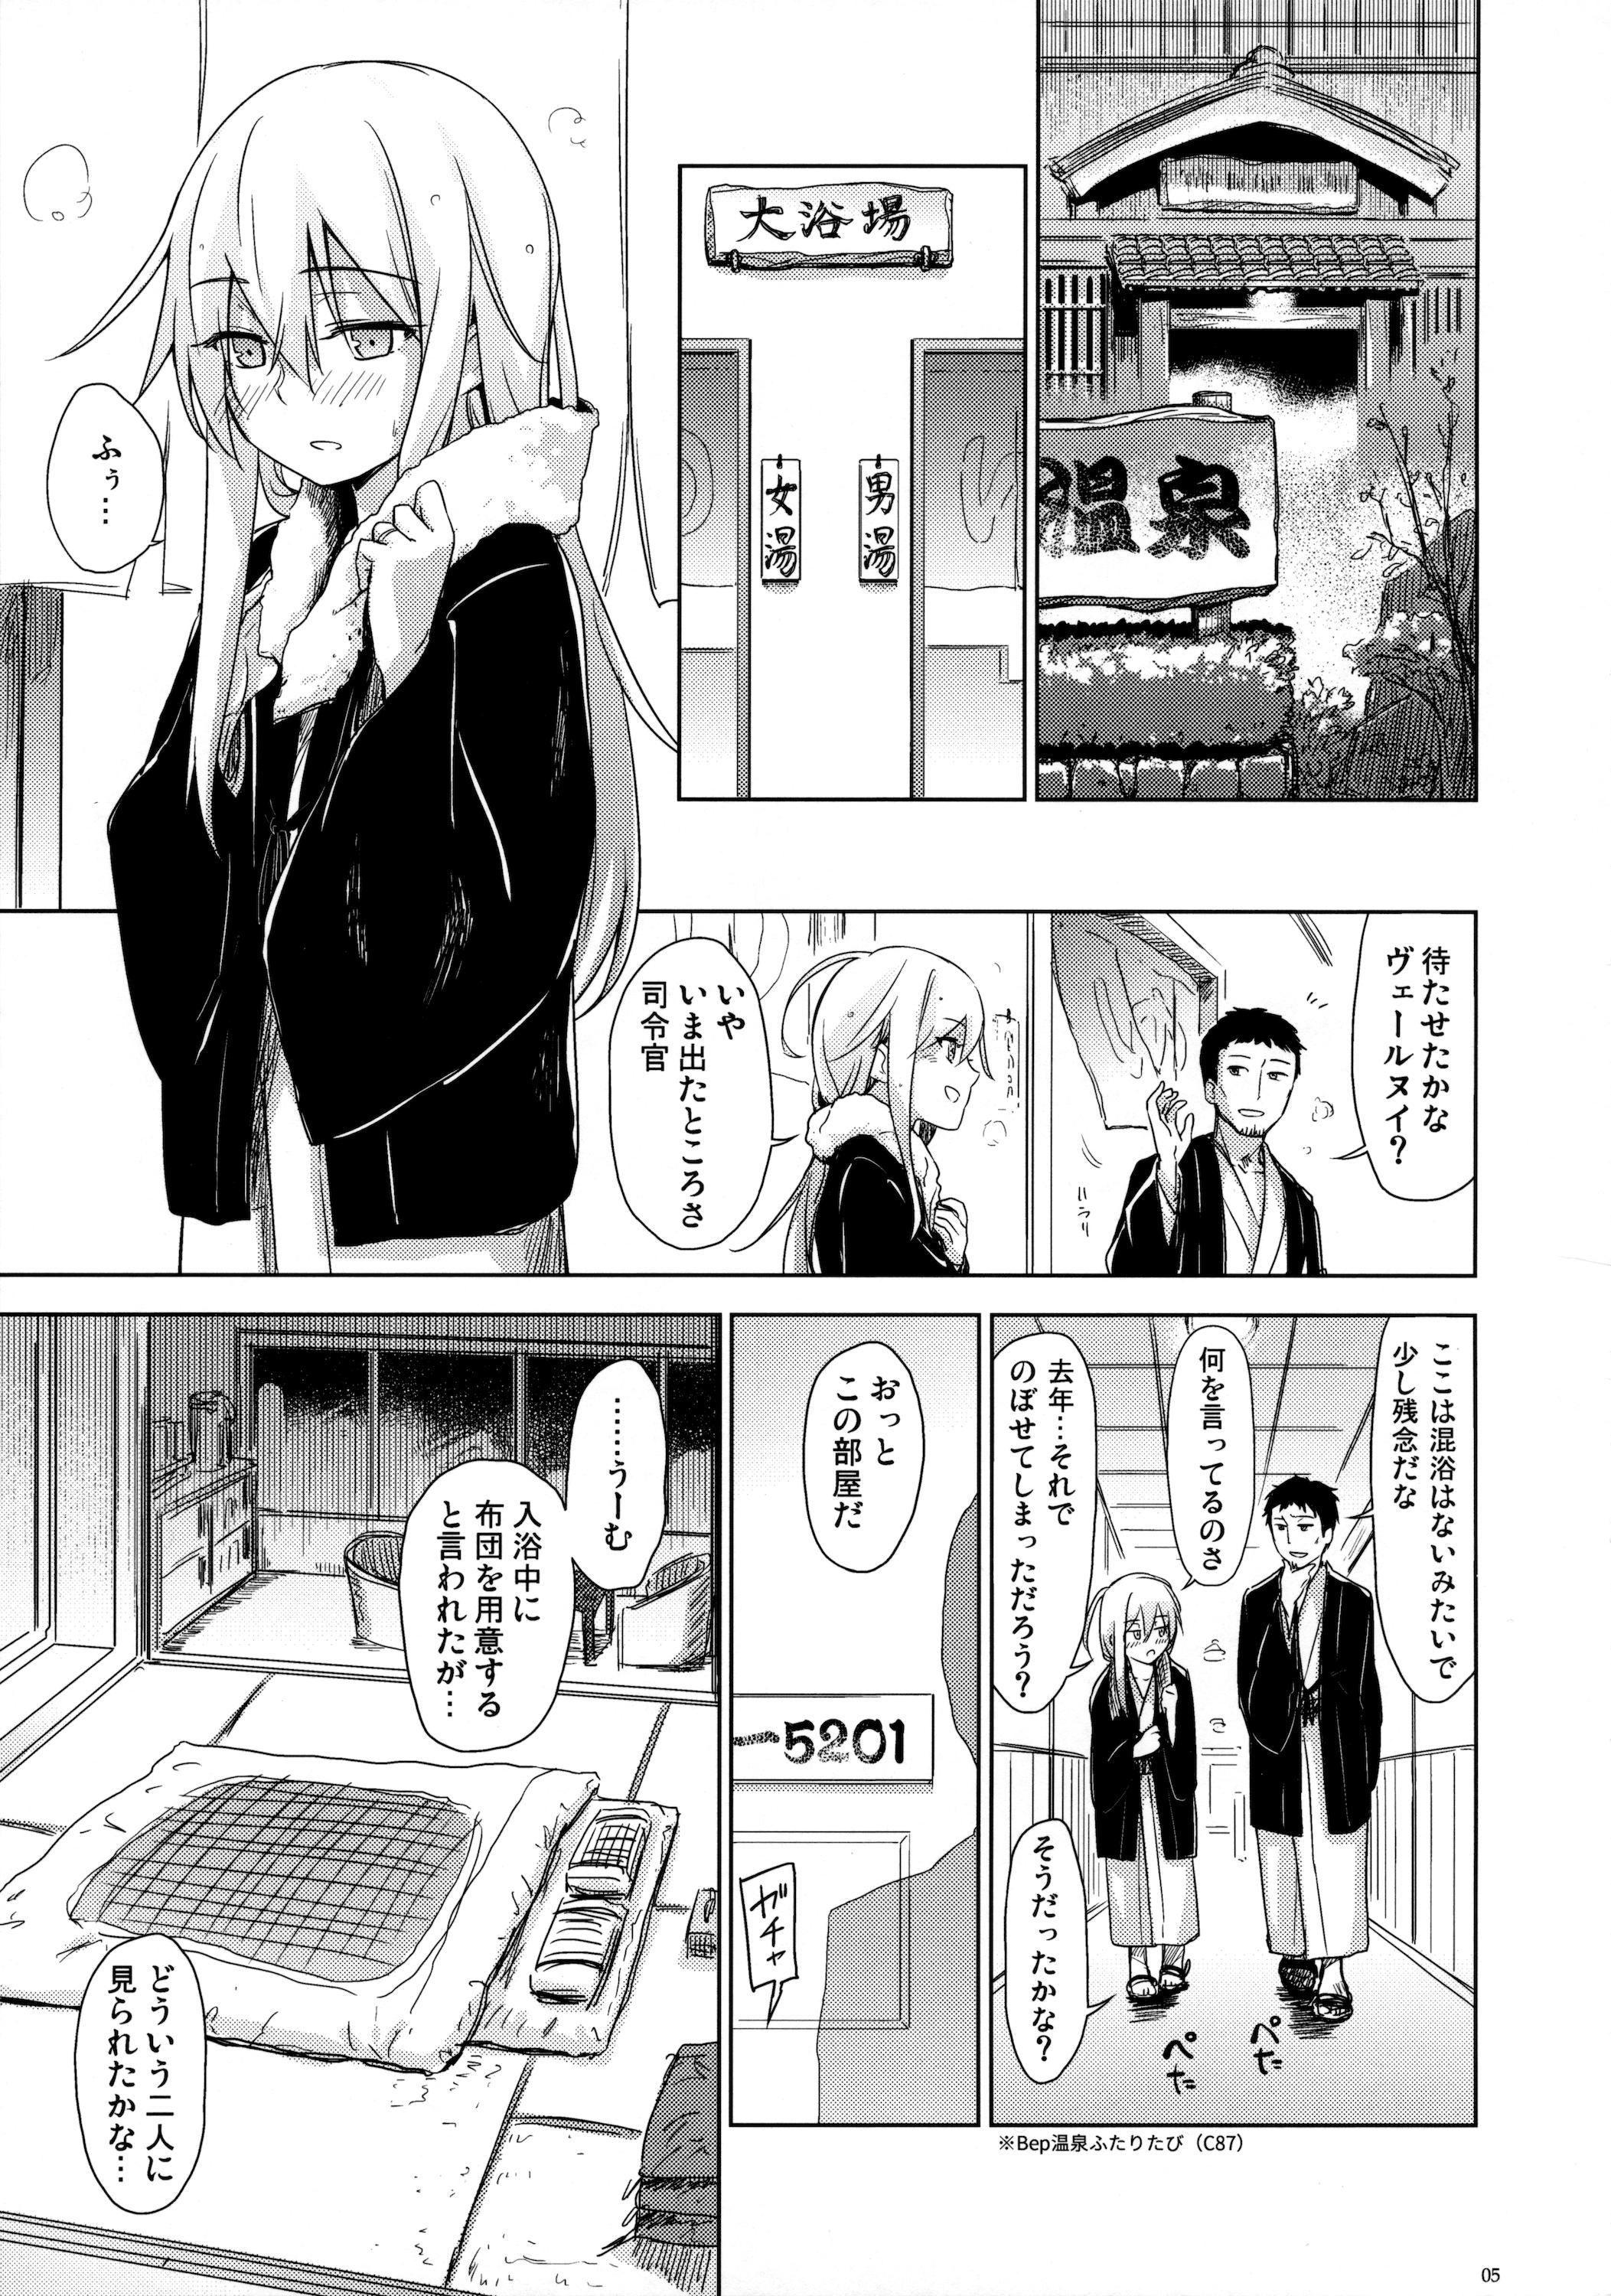 Moms Bep Onsen Futaritabi 2 - Kantai collection Submission - Page 4